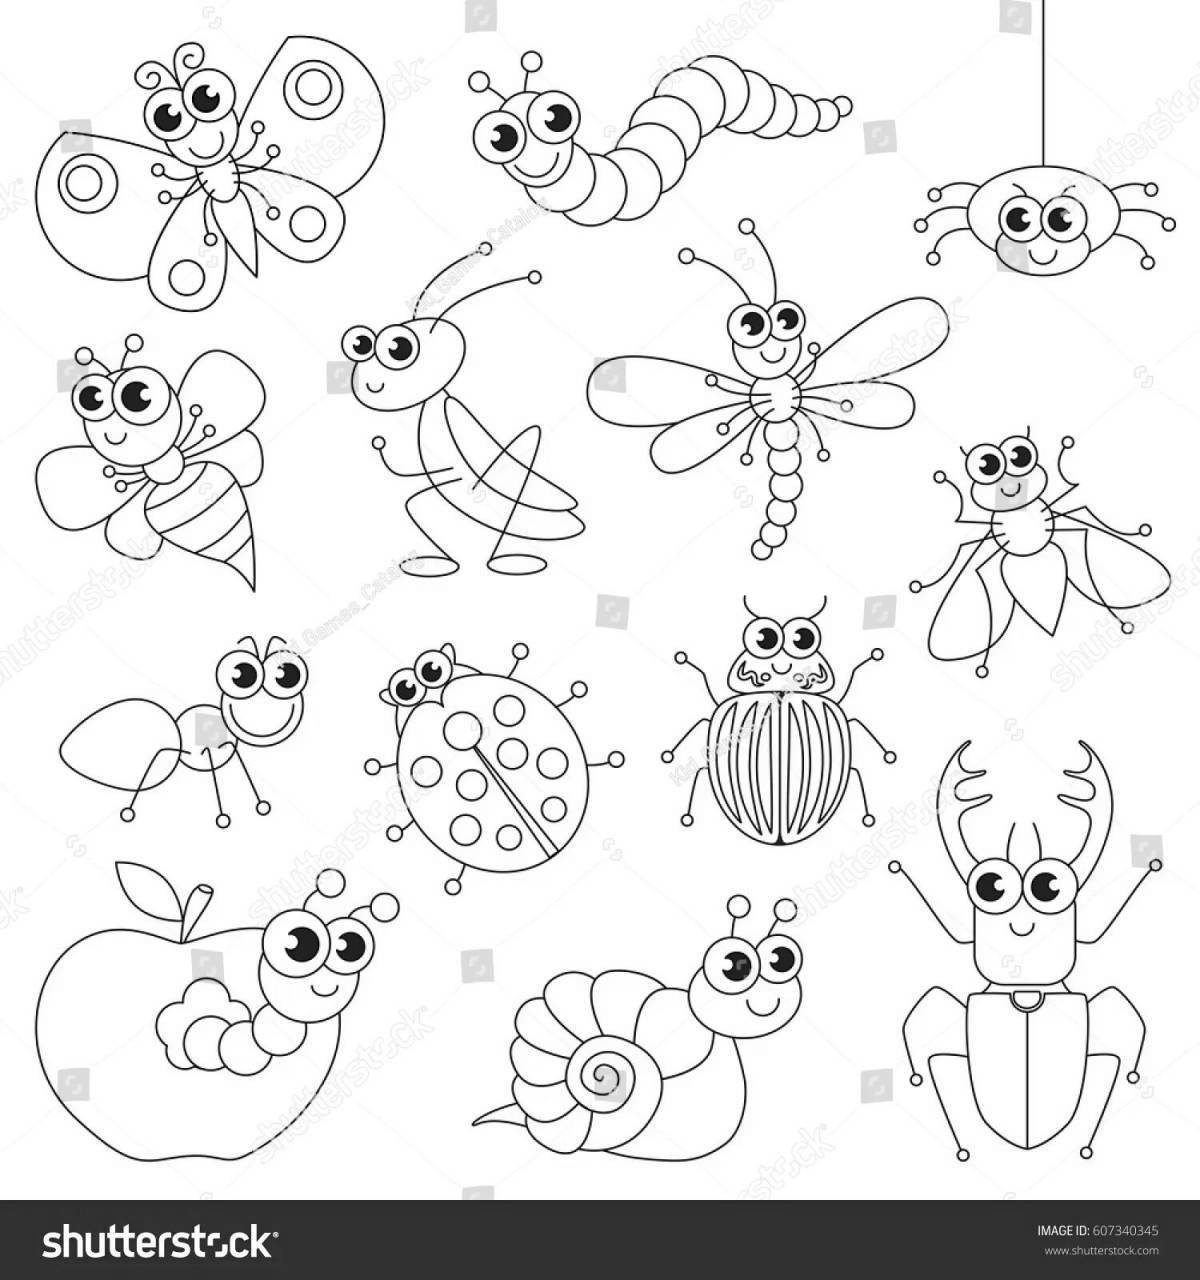 Charming insect class coloring book